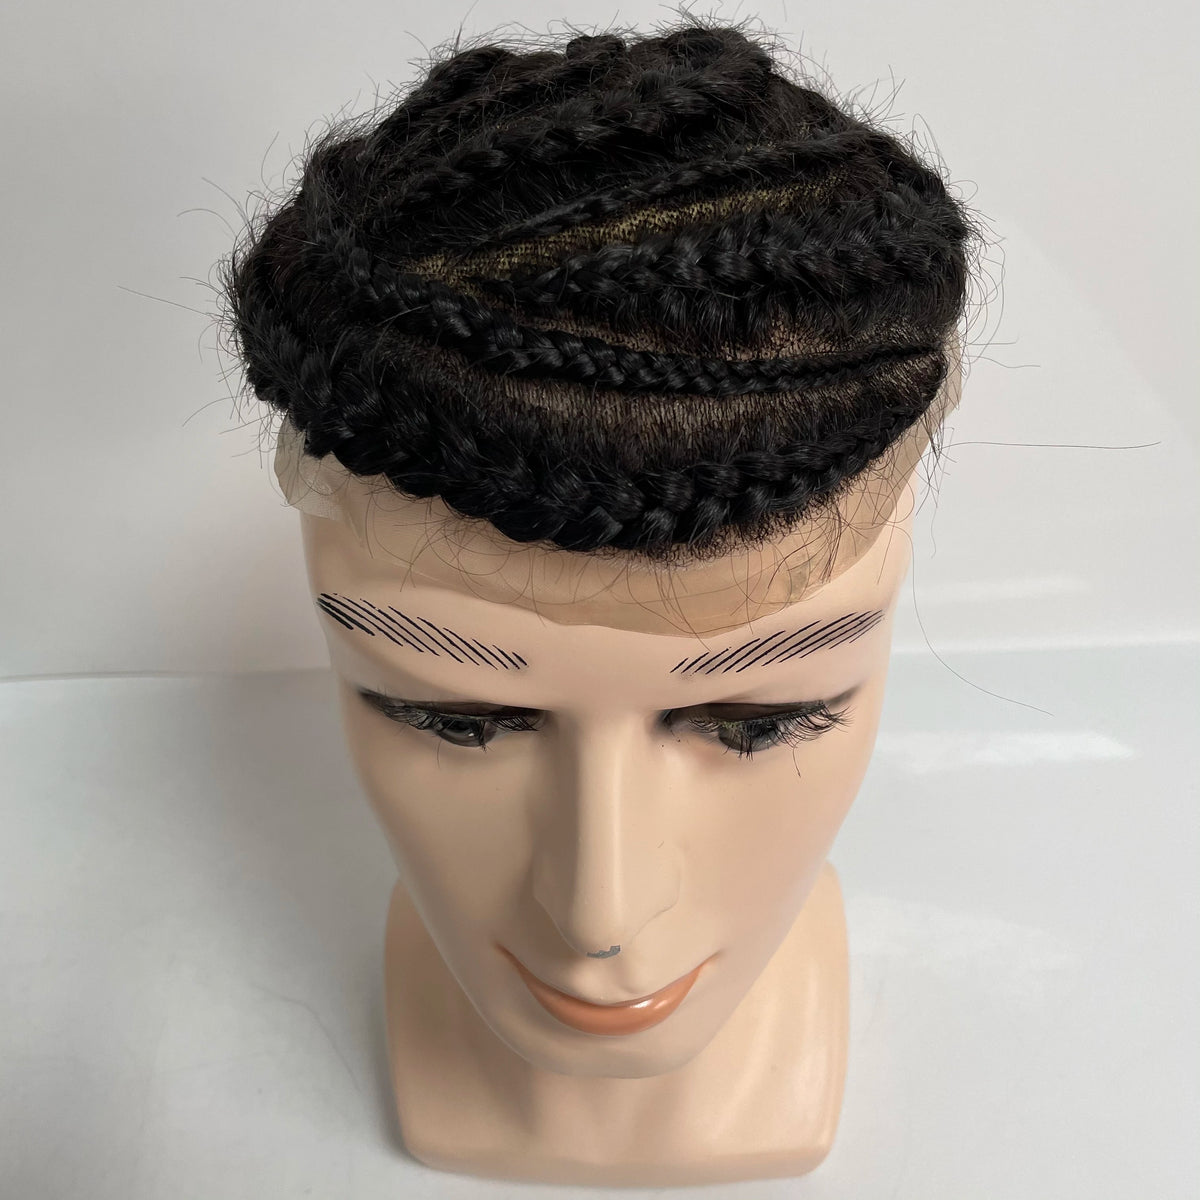 Human Hair System Lace with PU Braids Toupee for Black Men